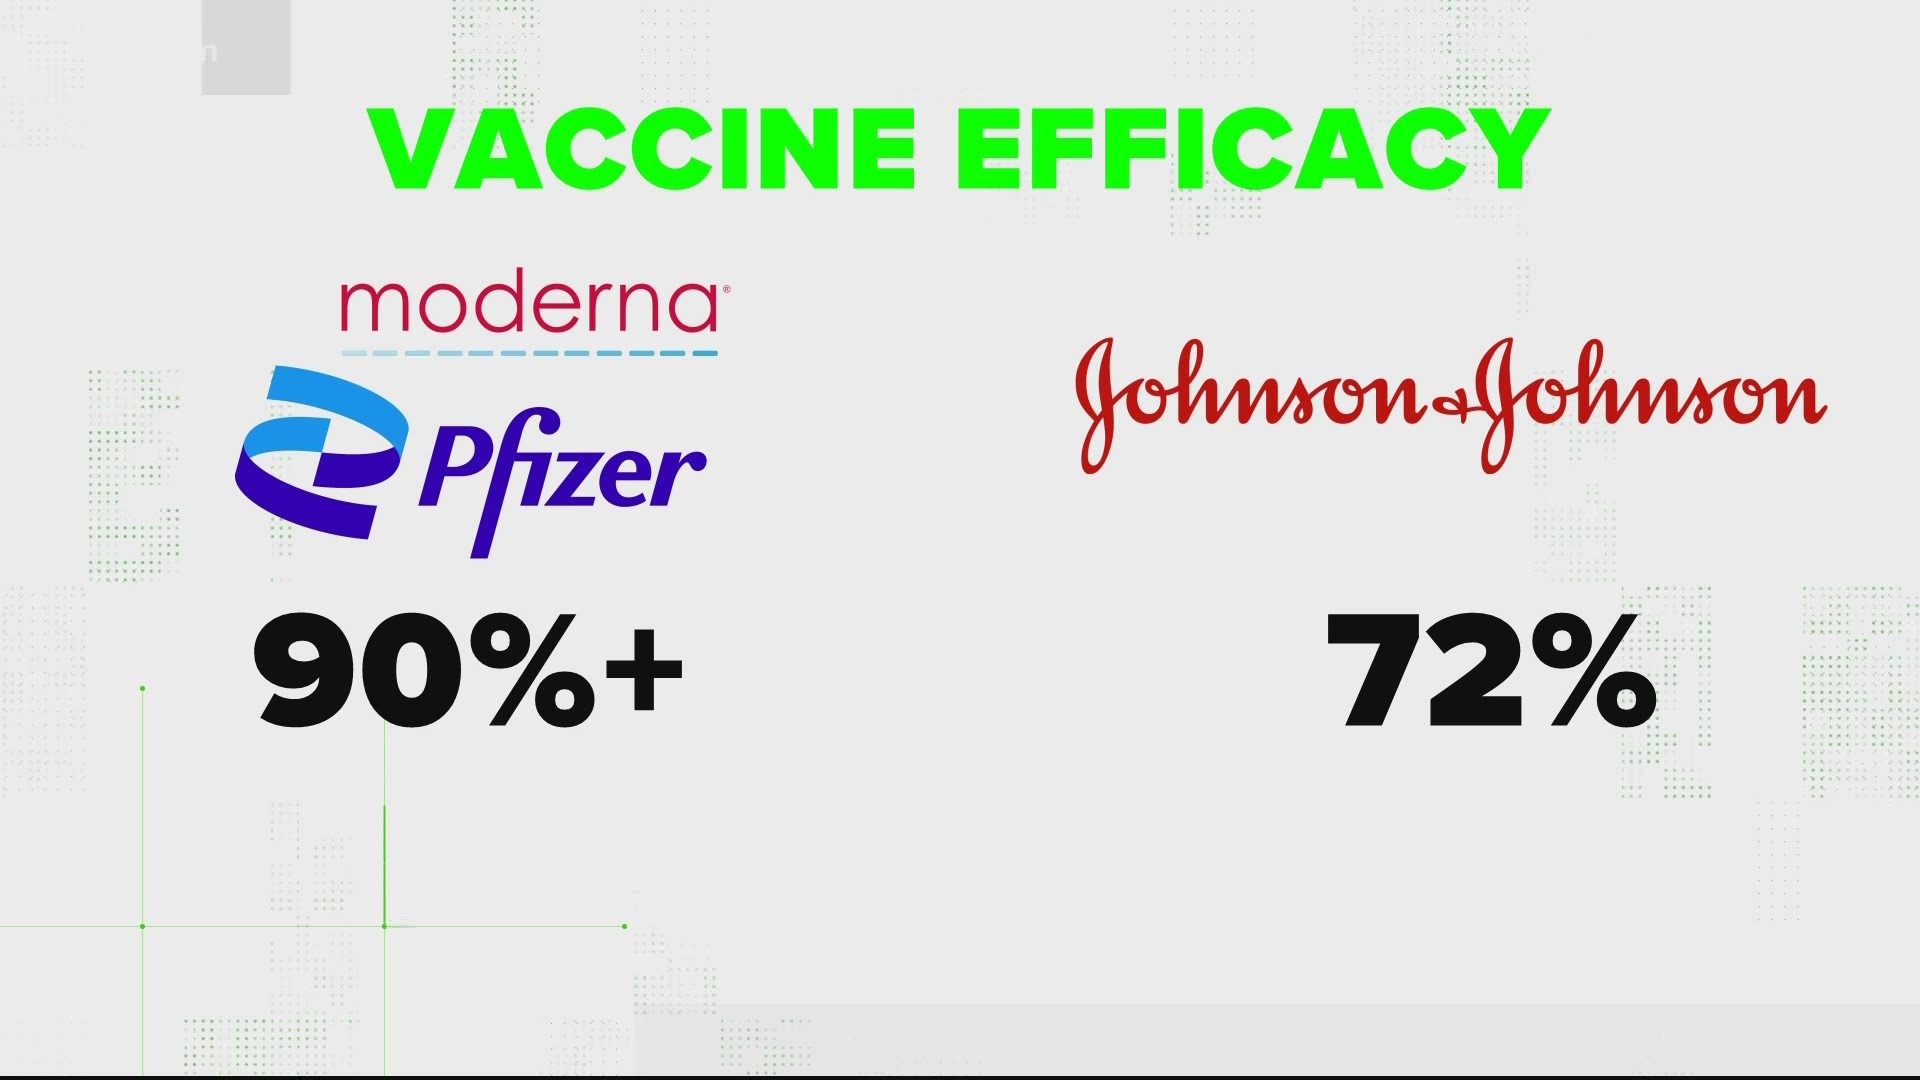 Experts say judging three vaccines by efficacy is difficult.